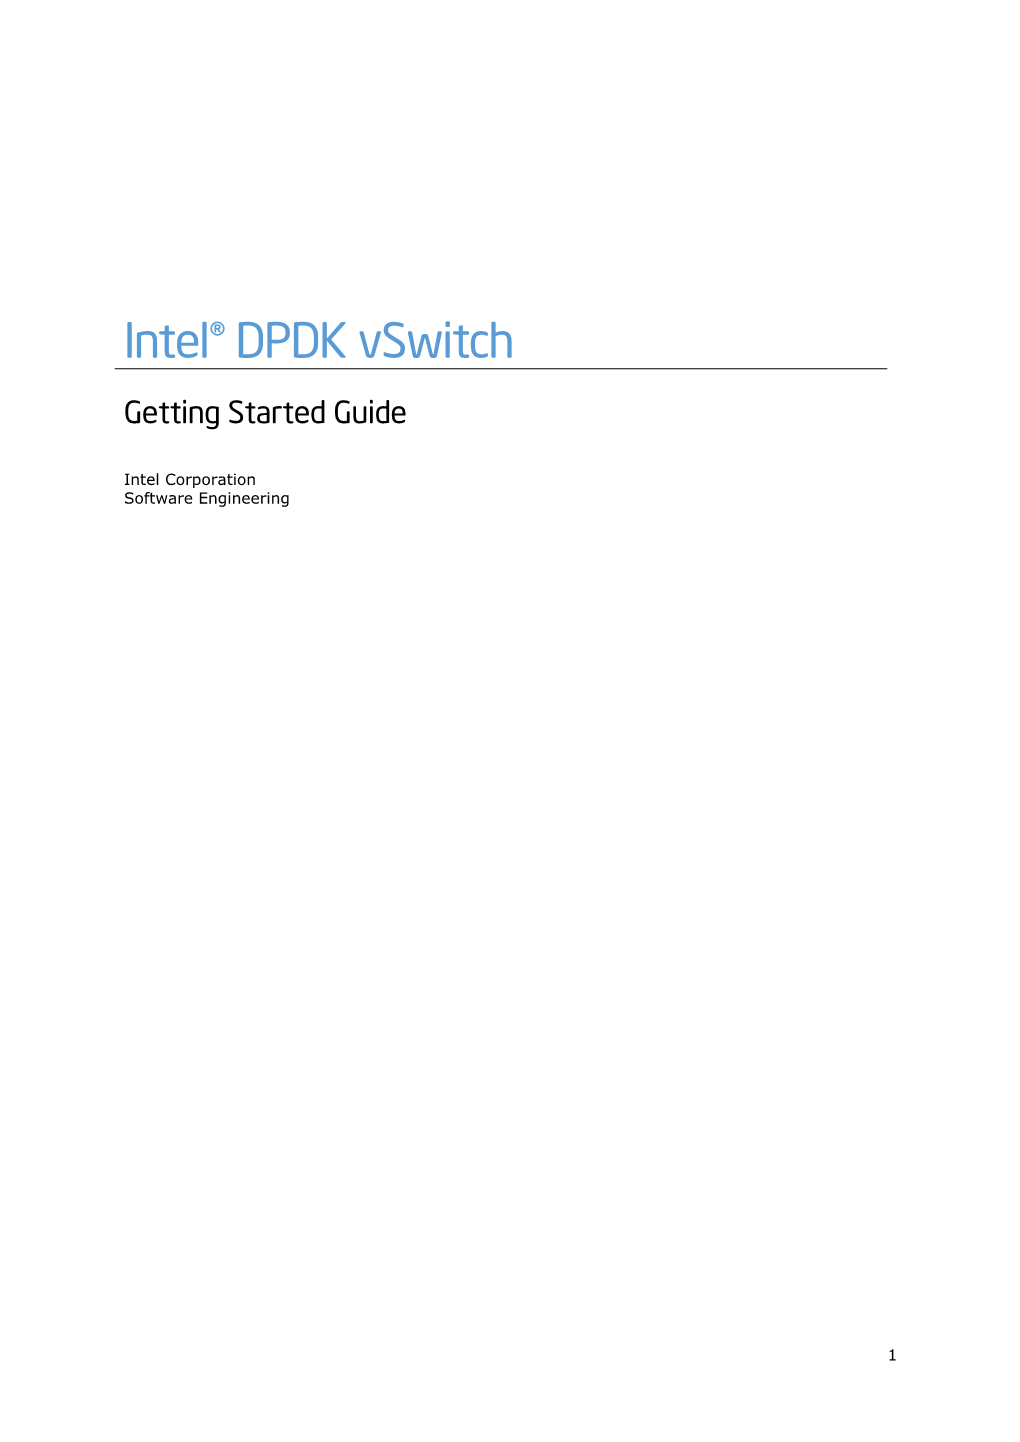 DPDK Vswitch Getting Started Guide